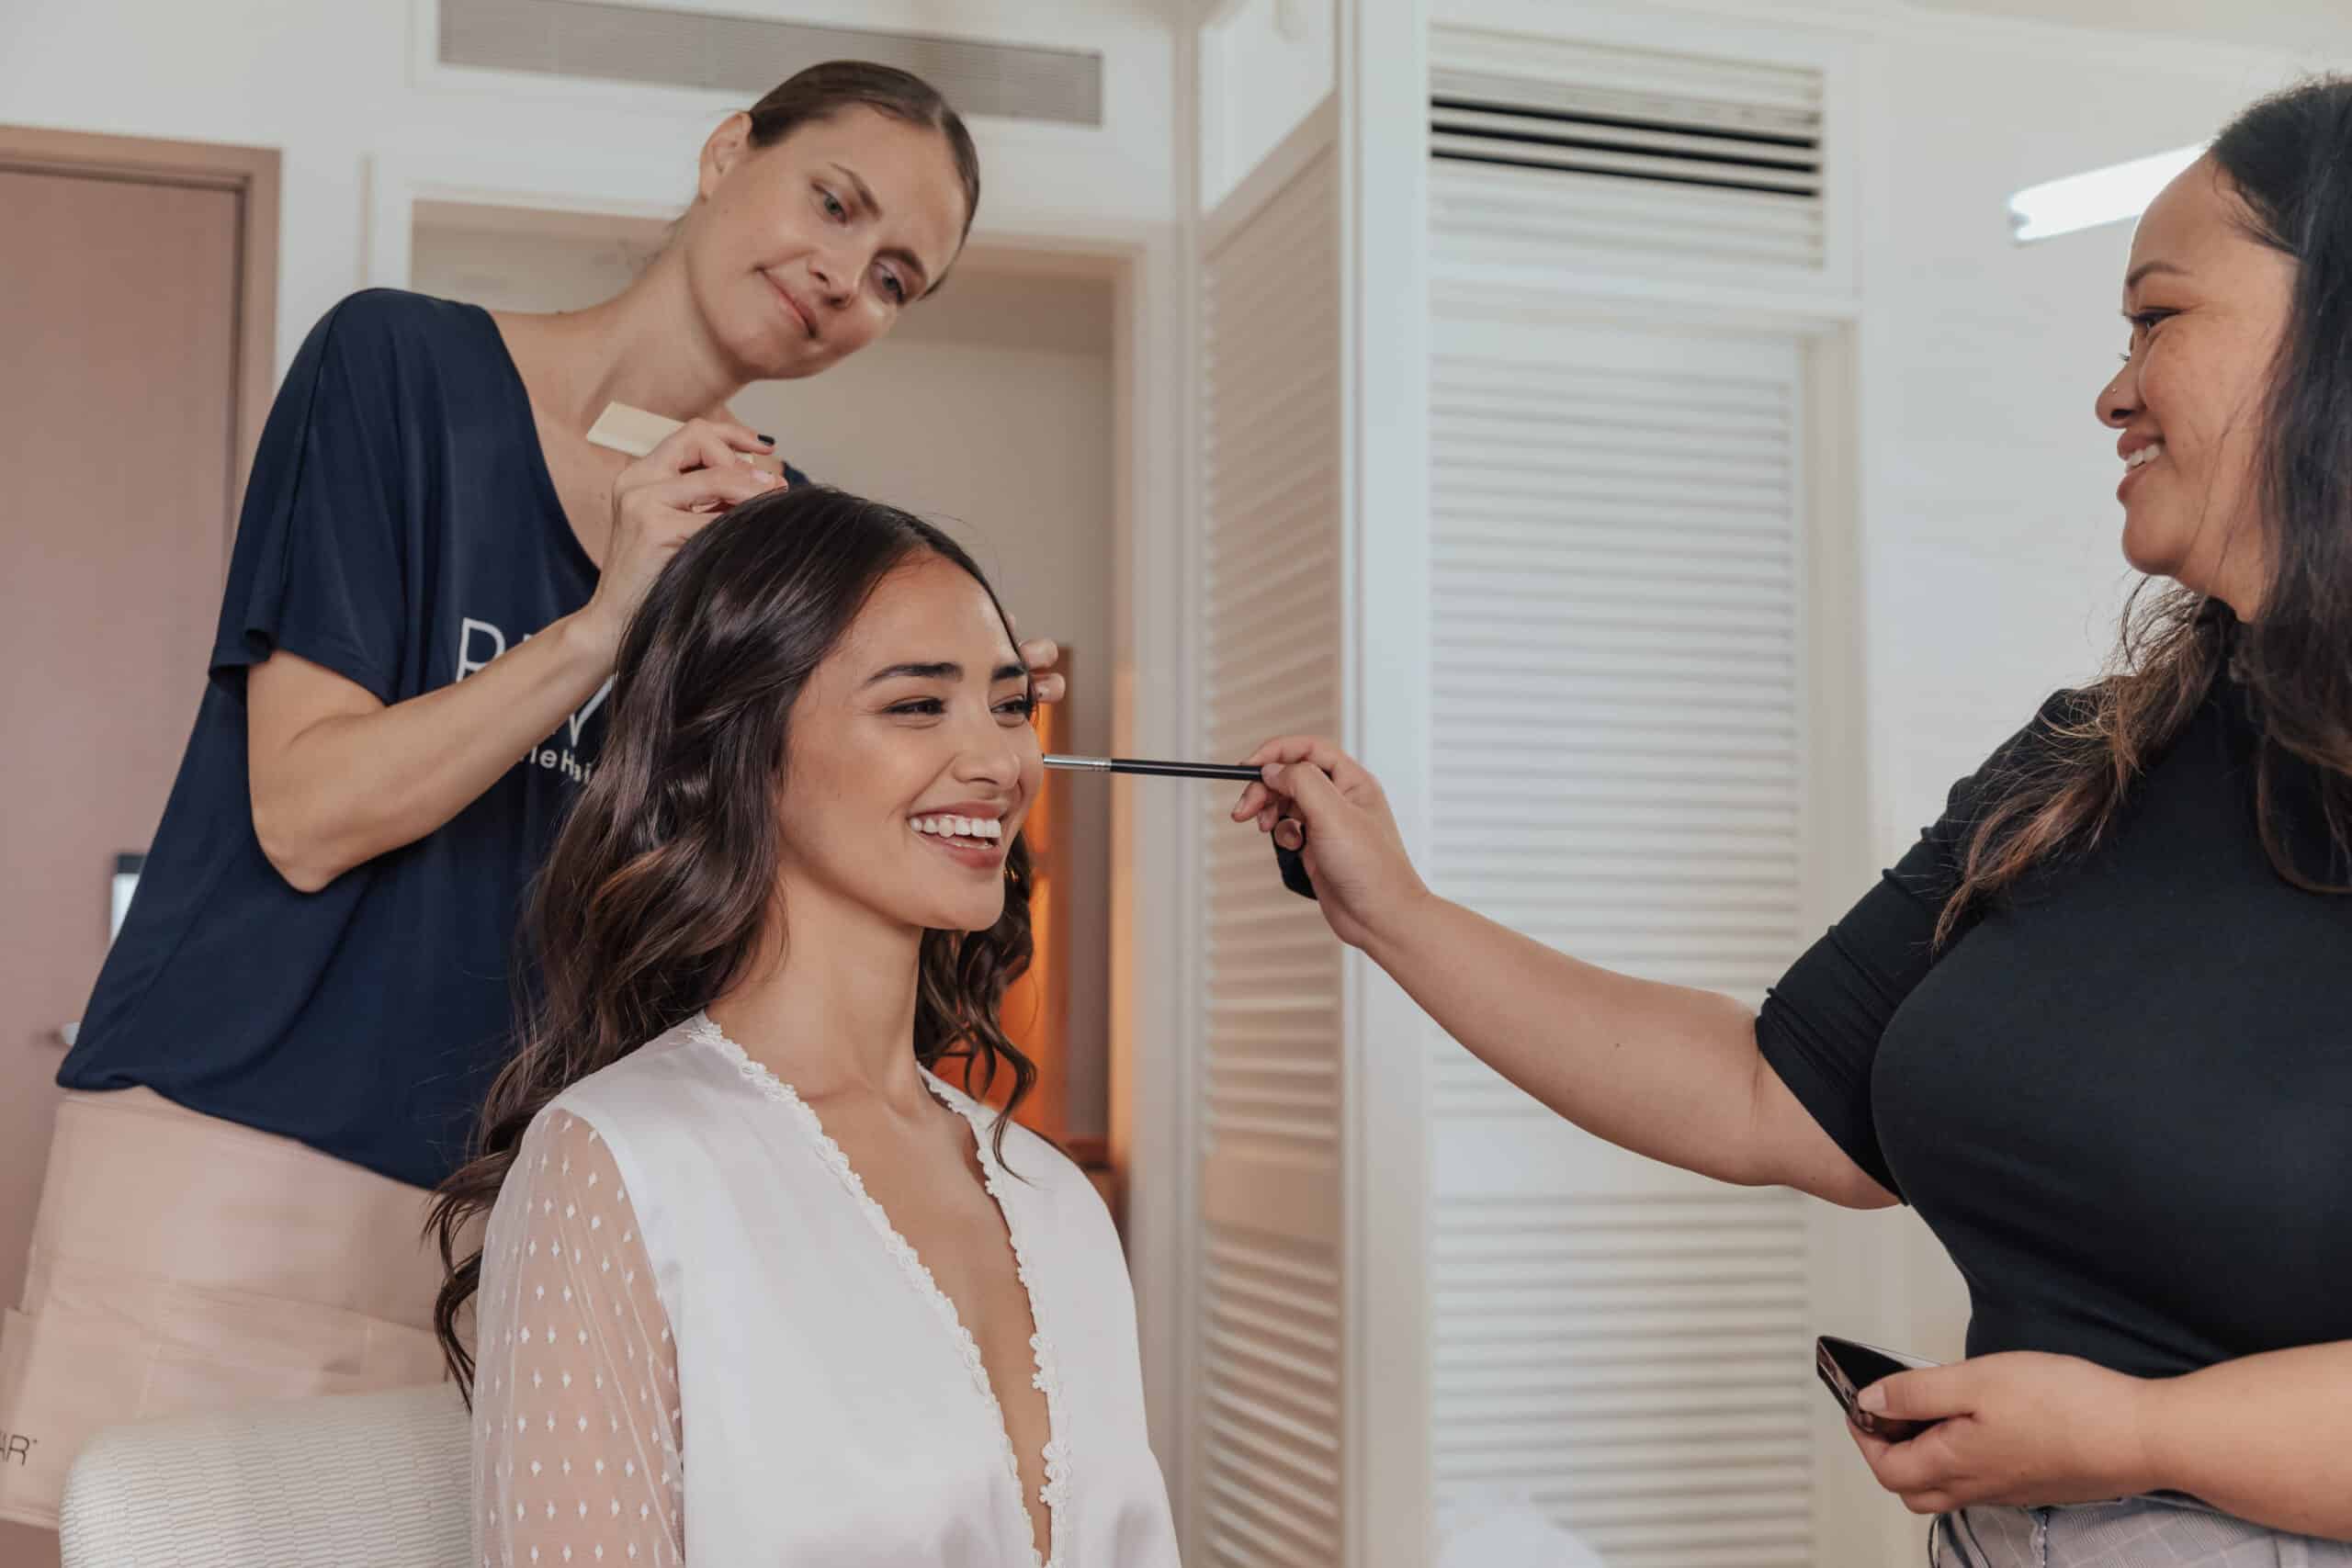 makeup artist and hair stylist doing a bride's hair and makeup